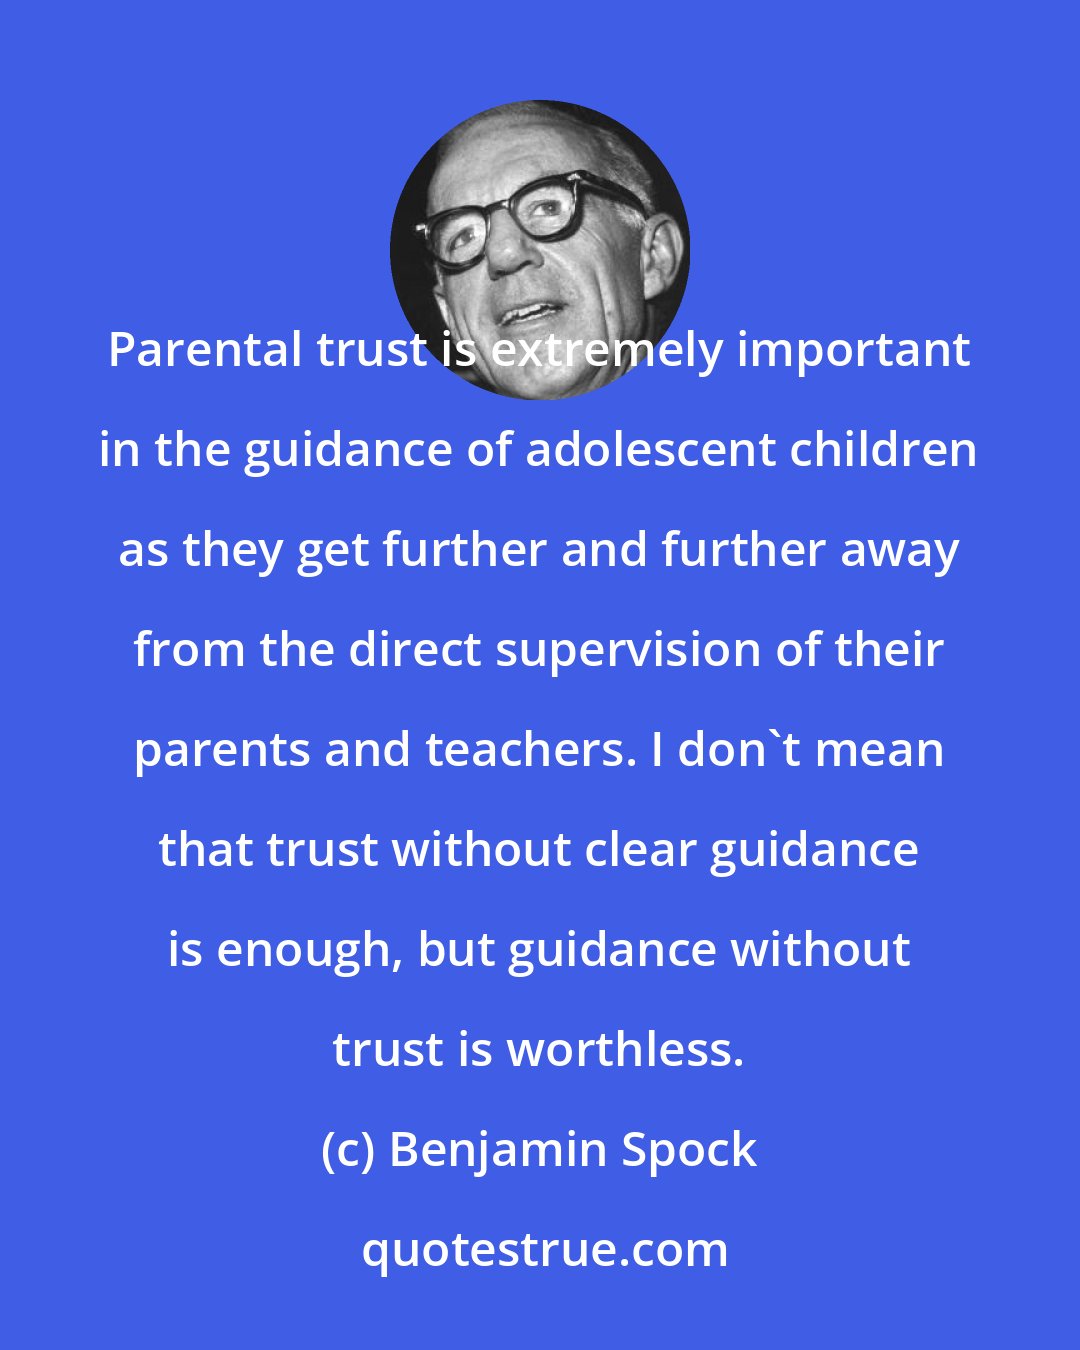 Benjamin Spock: Parental trust is extremely important in the guidance of adolescent children as they get further and further away from the direct supervision of their parents and teachers. I don't mean that trust without clear guidance is enough, but guidance without trust is worthless.